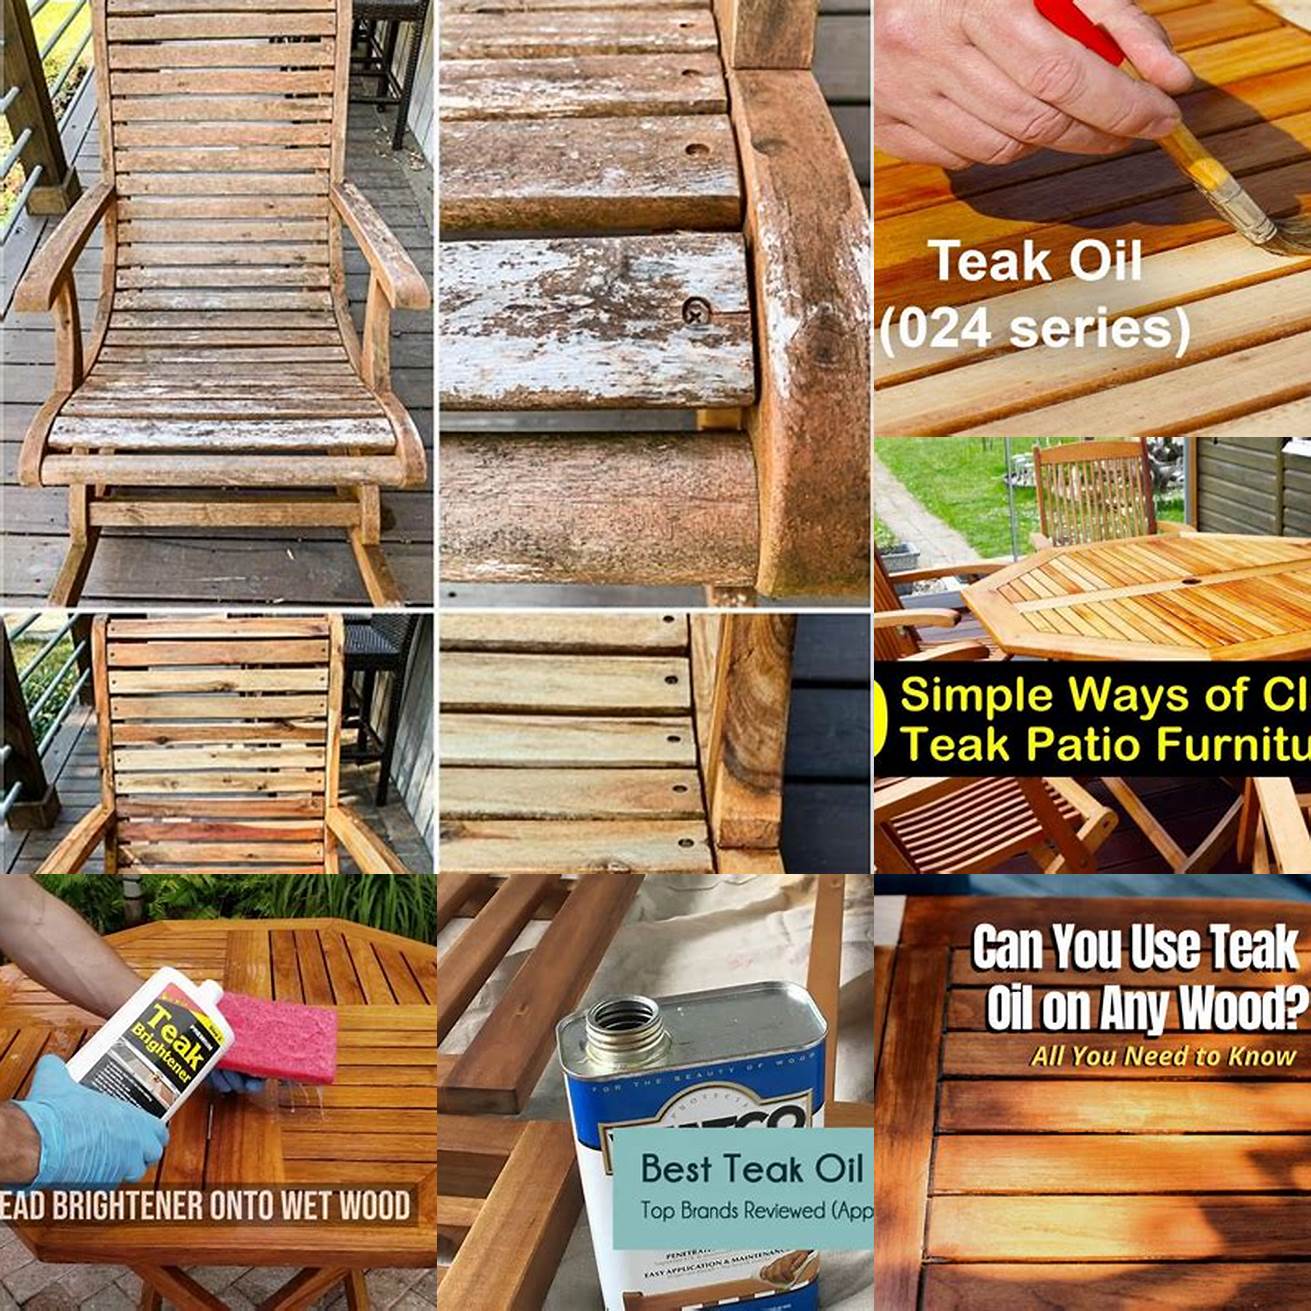 Using the Right Amount of Teak Oil